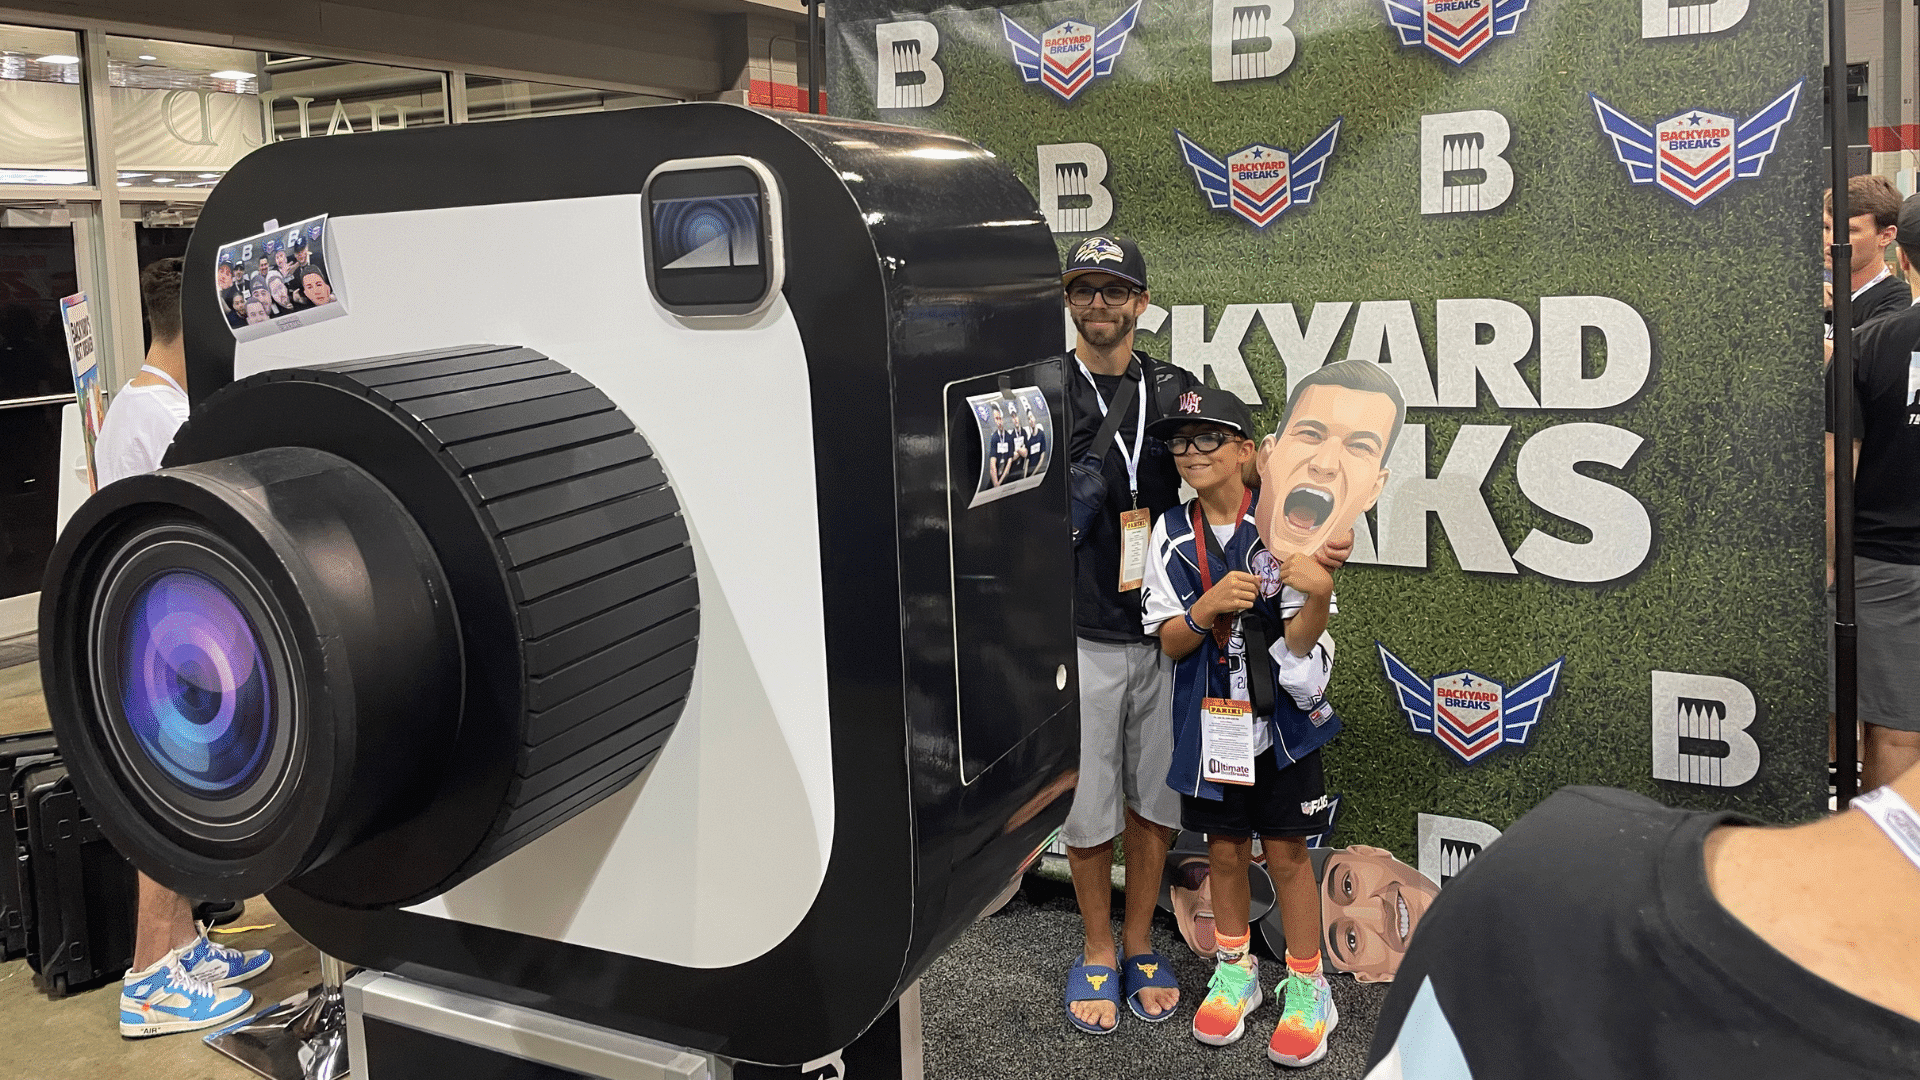 Backyard Breaks' Selfie Hashtag Photo Booth | Experience by Interactive Entertainment Group